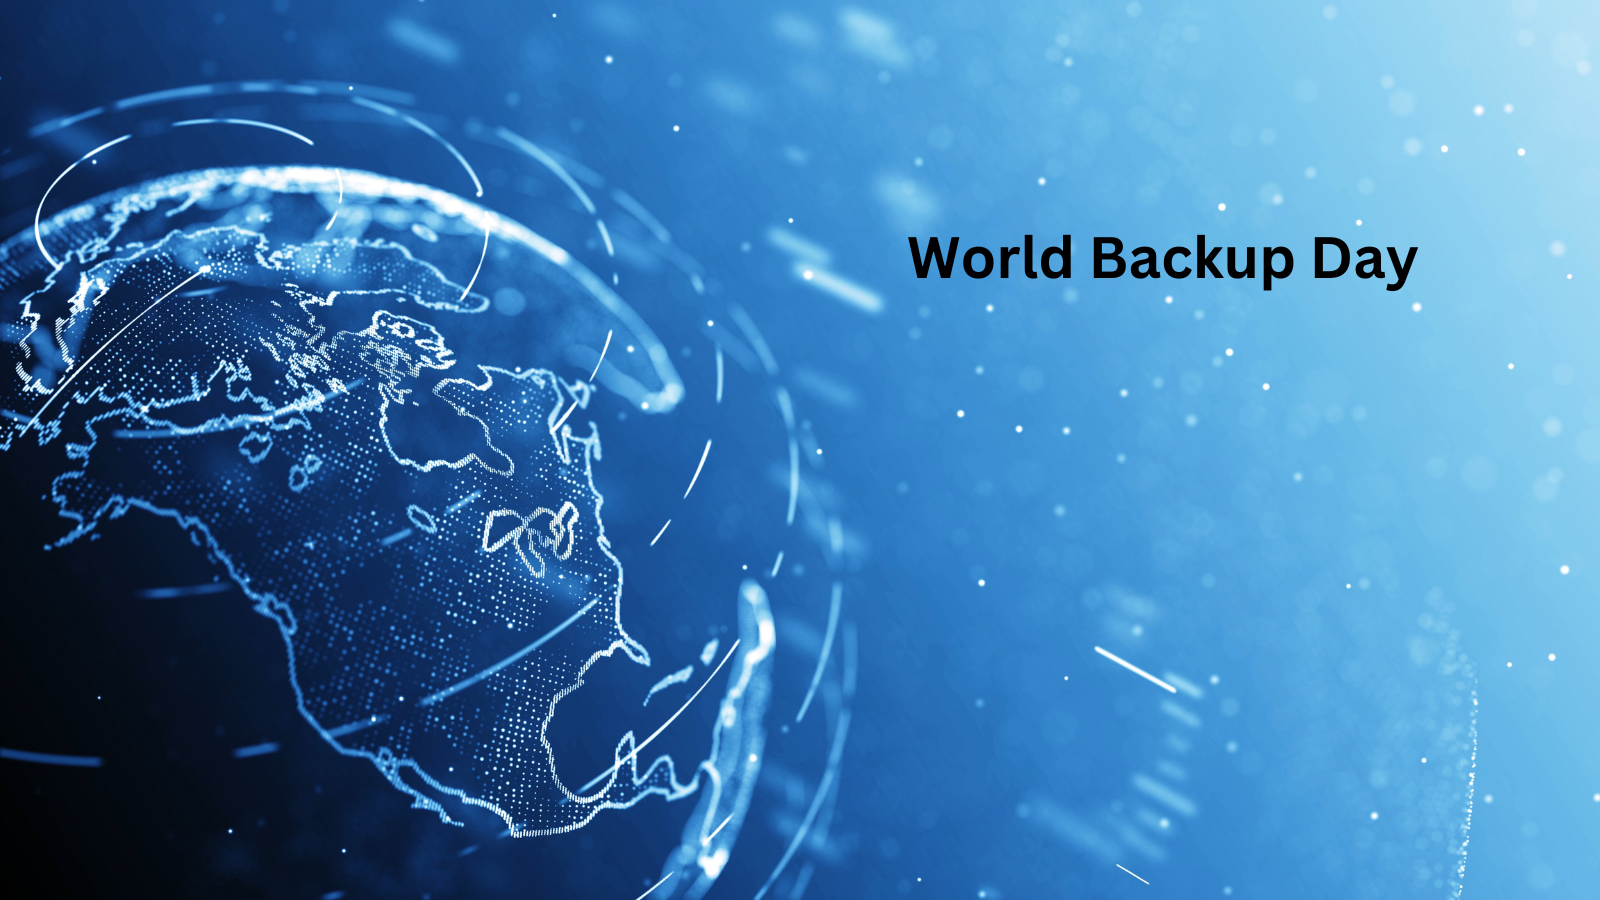 World Backup Day Taking Stock of Data Protection Best Practices